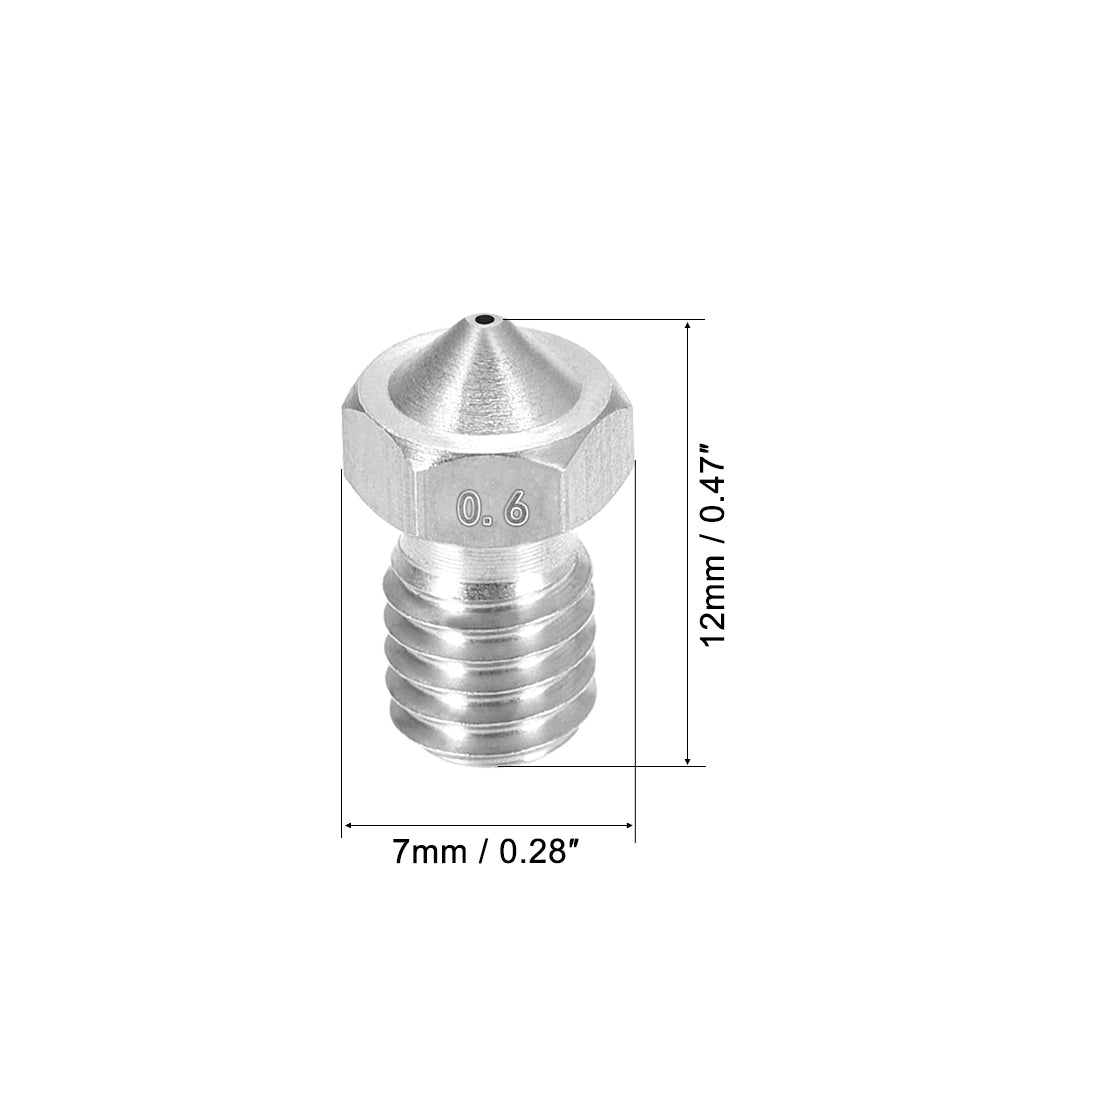 uxcell Uxcell 0.6mm 3D Printer Nozzle, Fit for V6, for 1.75mm Filament Stainless Steel 1pcs